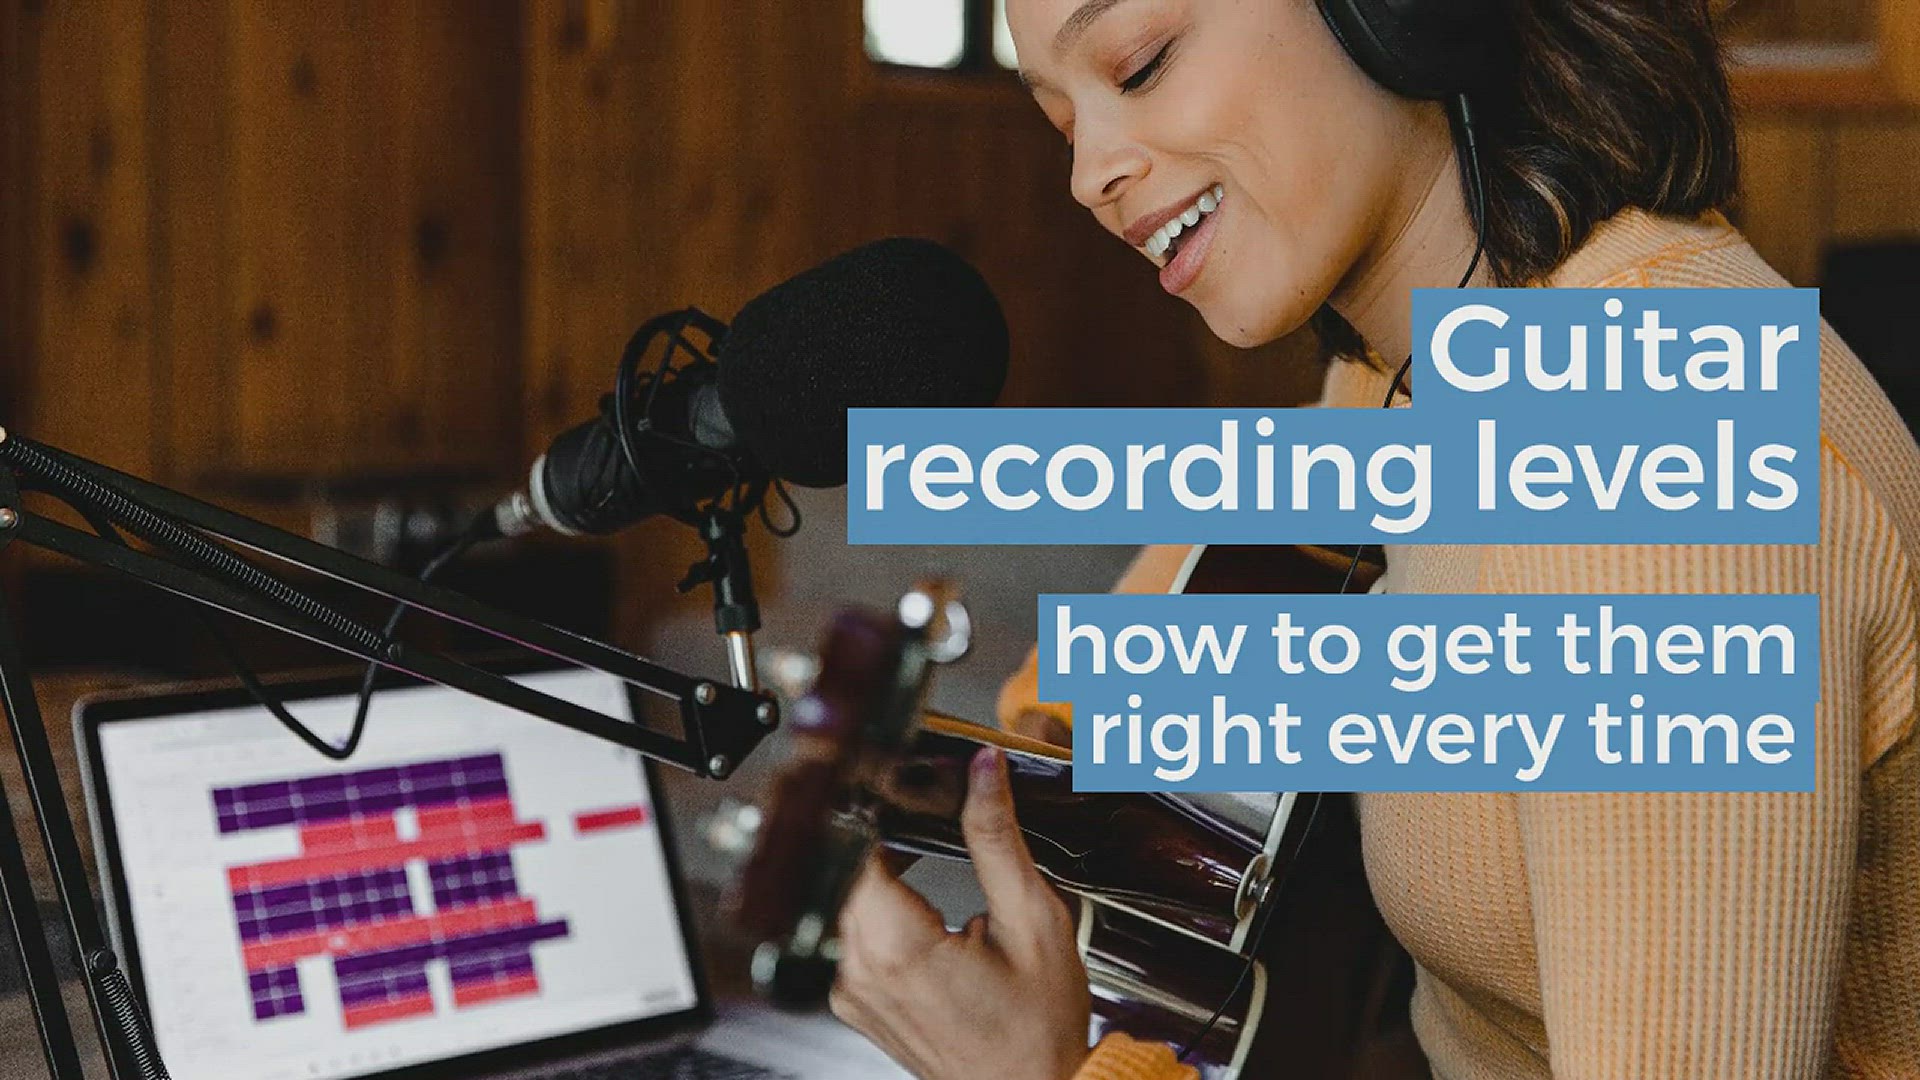 'Video thumbnail for How to set guitar recording levels'